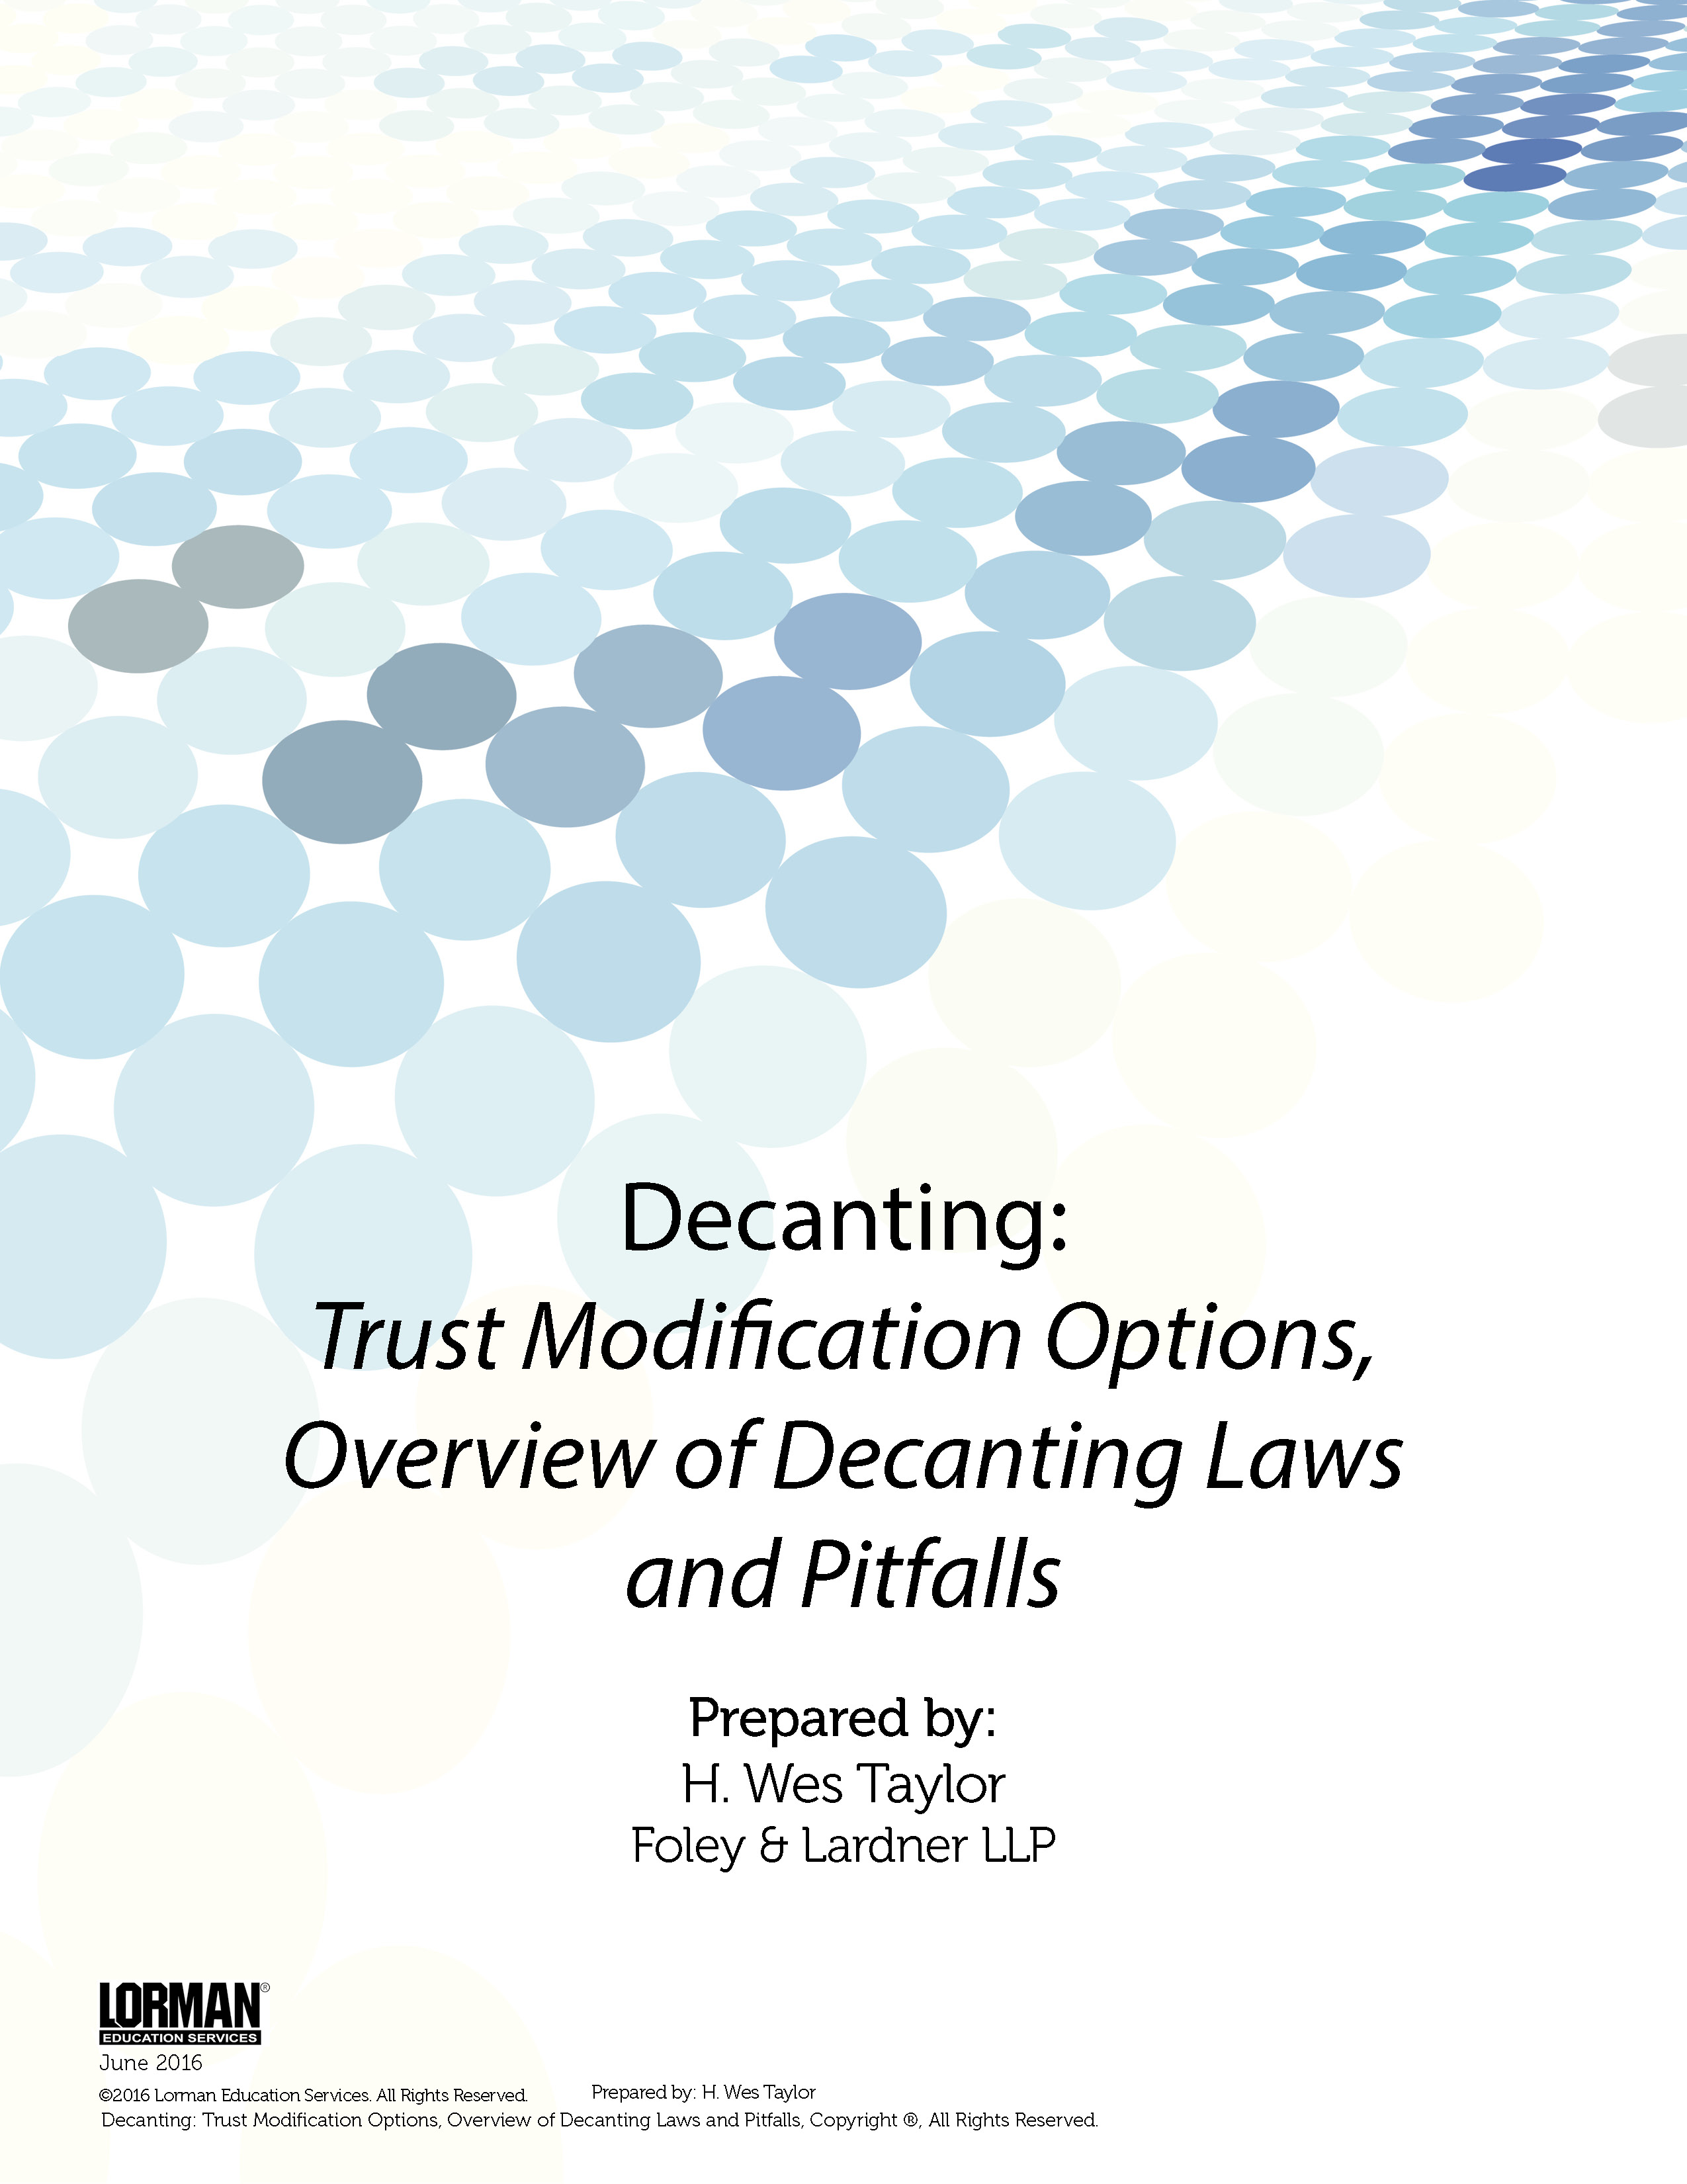 Decanting - Trust Modification Options, Overview of Decanting Laws and Pitfalls